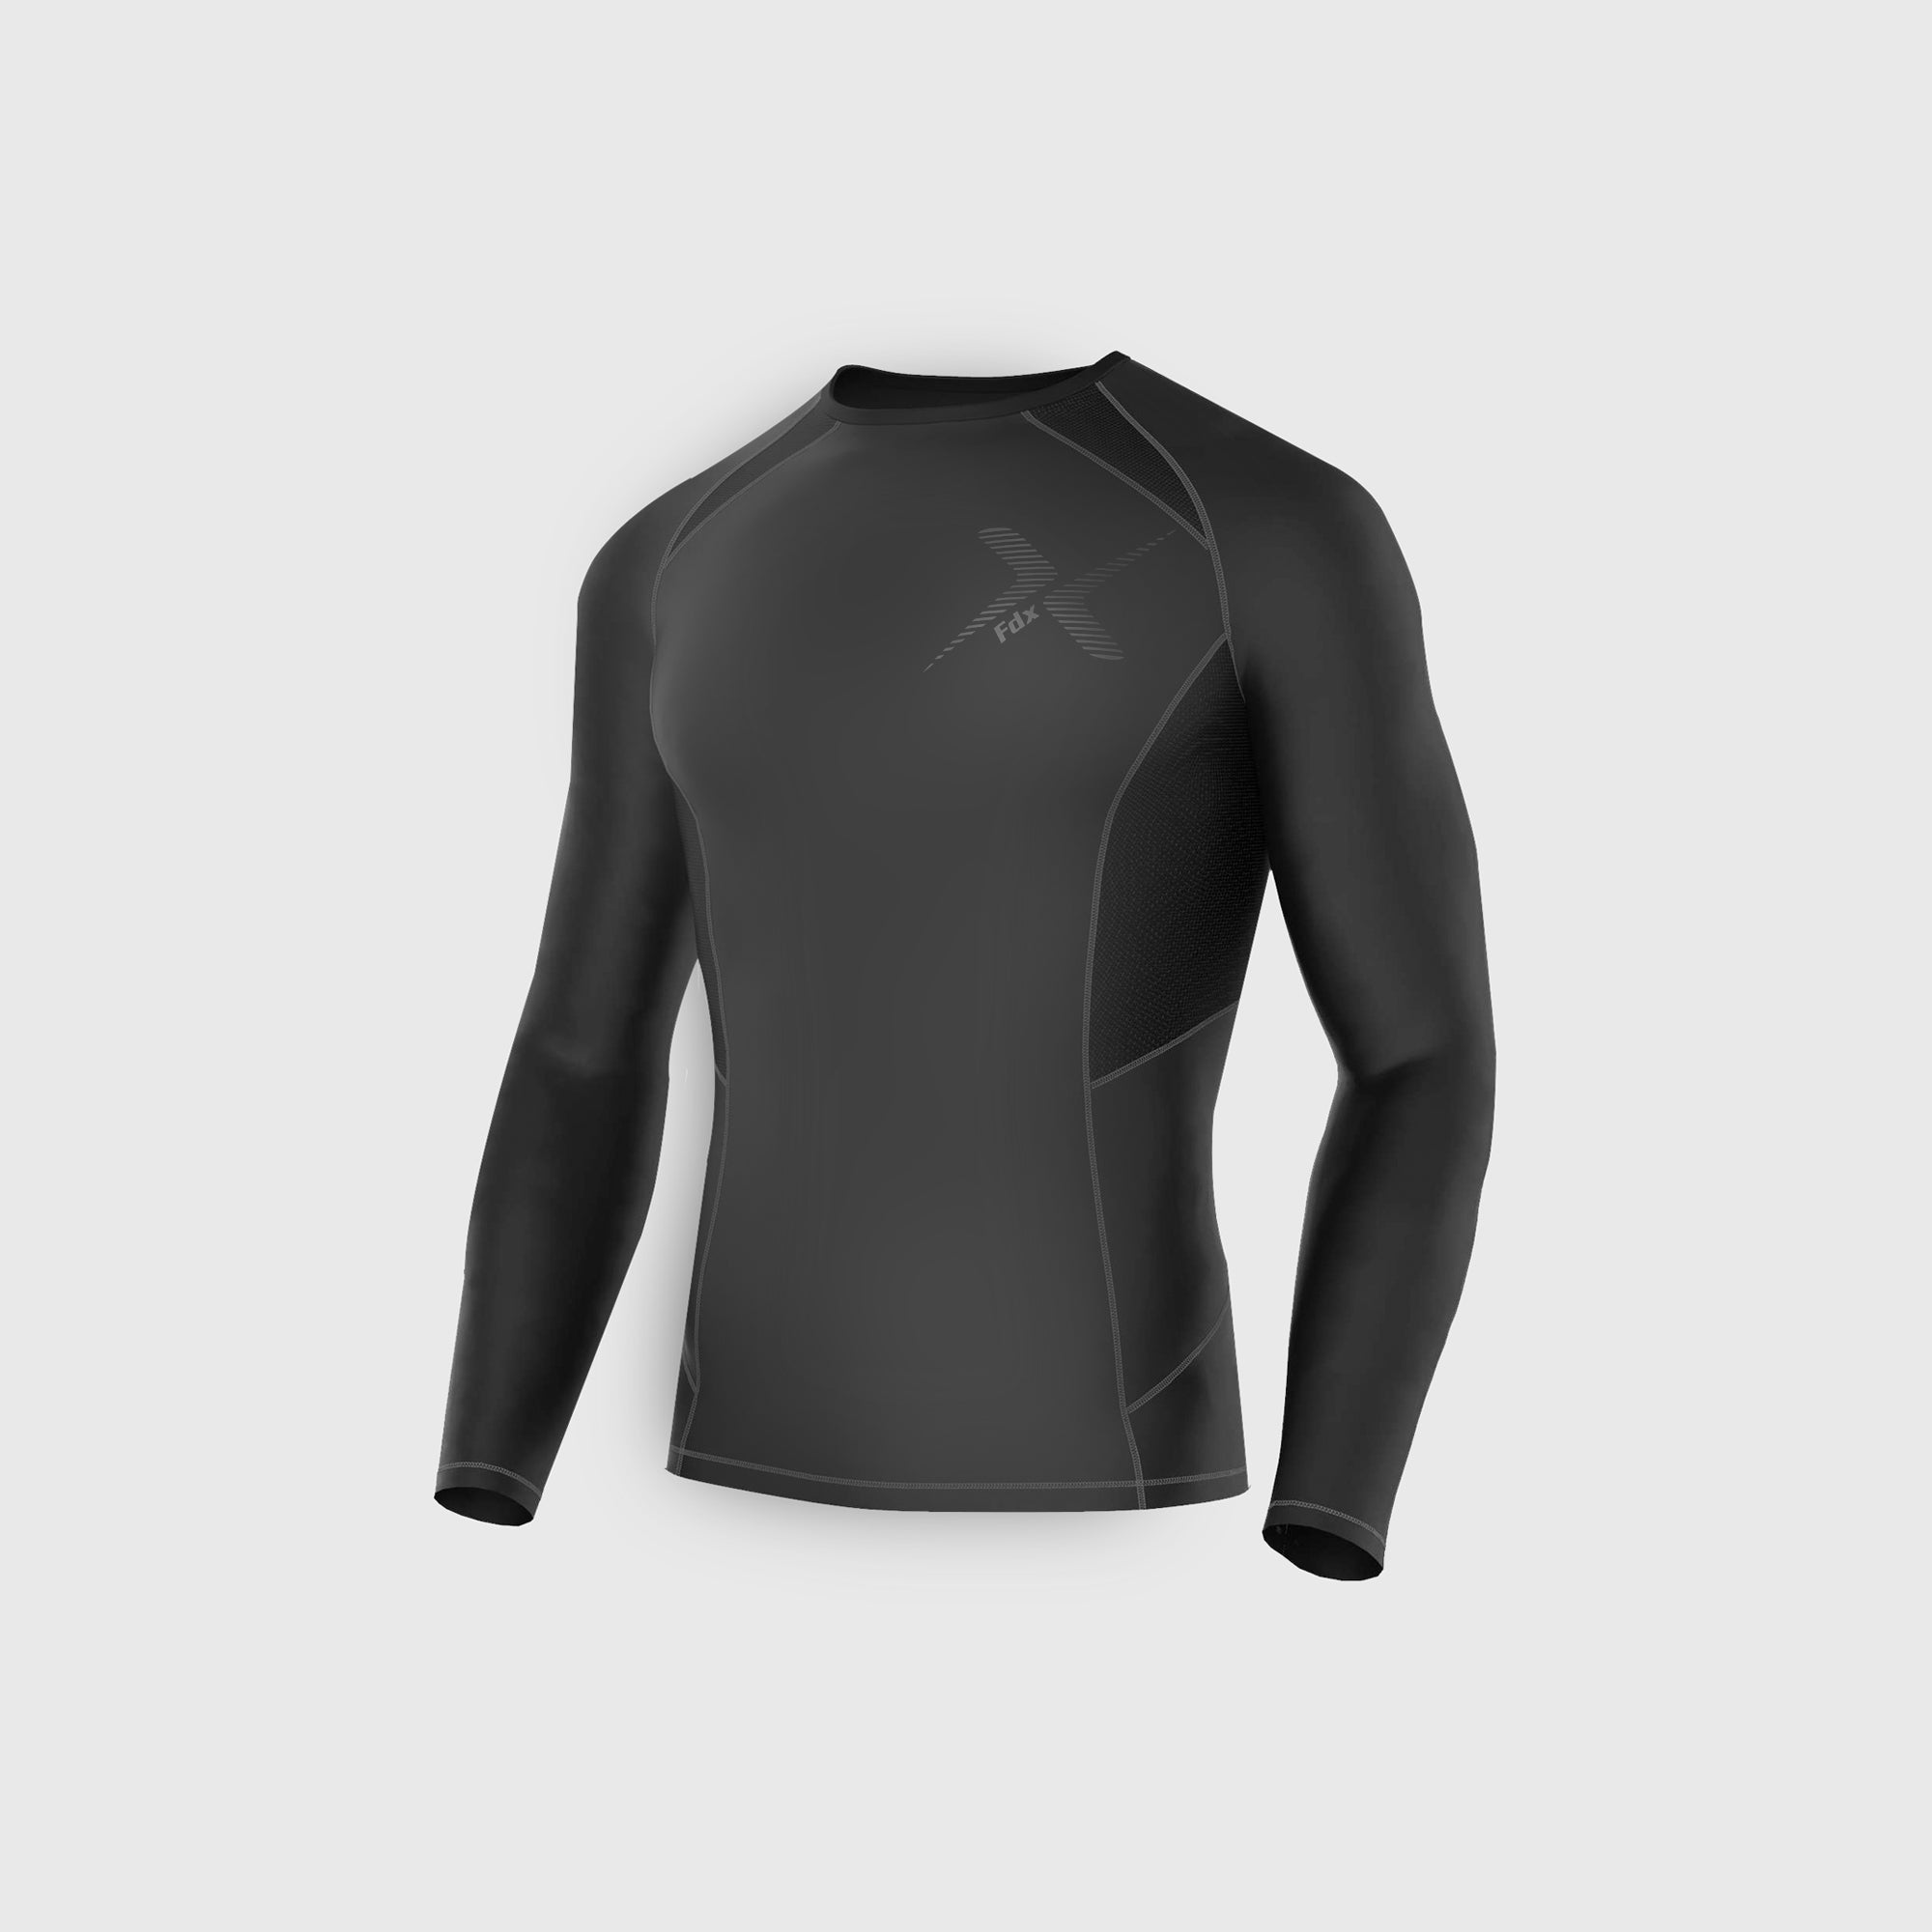 Fdx Mens Black & Grey Long Sleeve Compression Top Running Gym Workout Wear Rash Guard Stretchable Breathable - Recoil